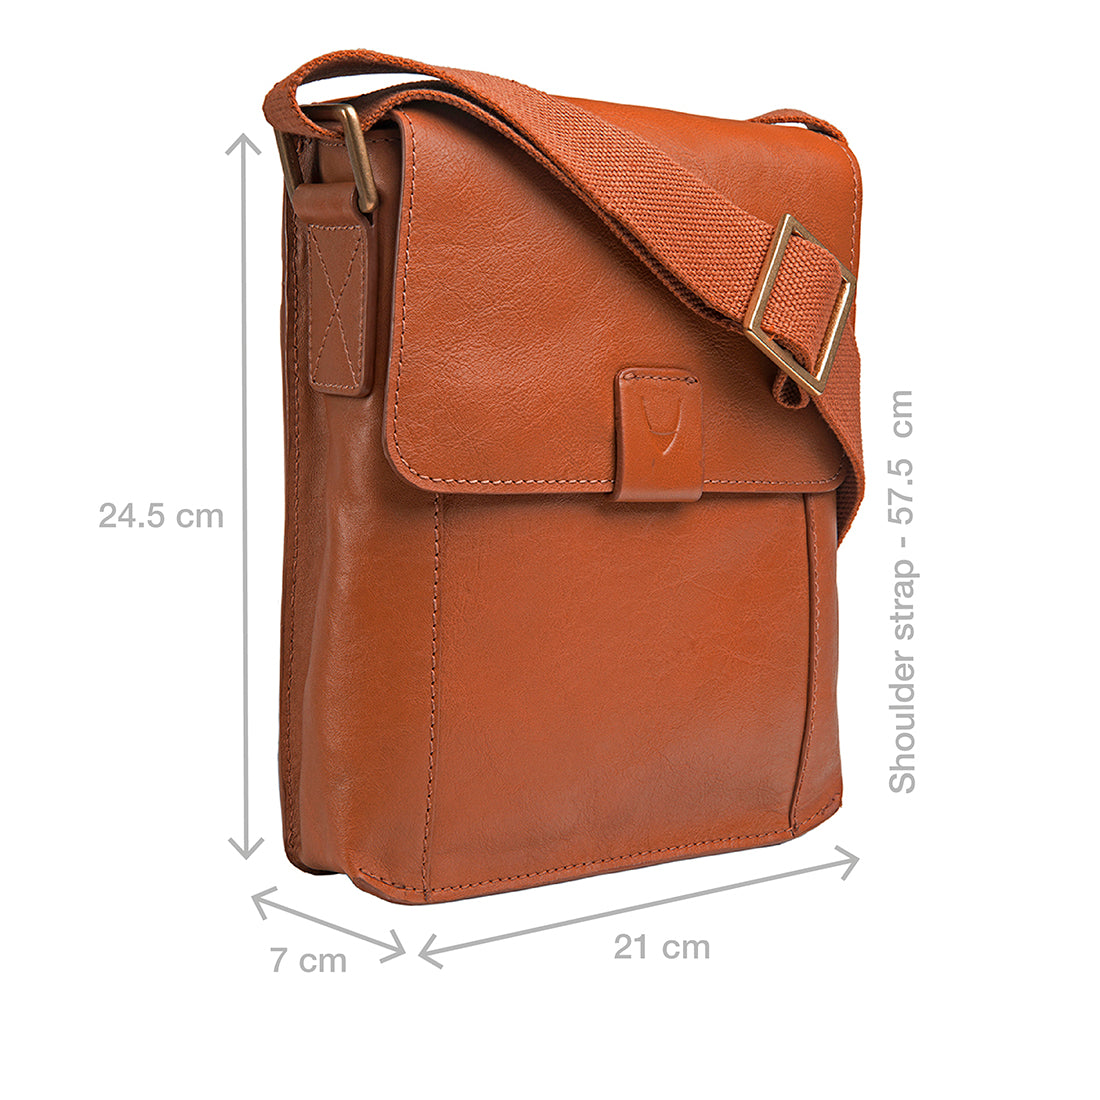 Hidesign Leather  Handcrafted Leather Goods